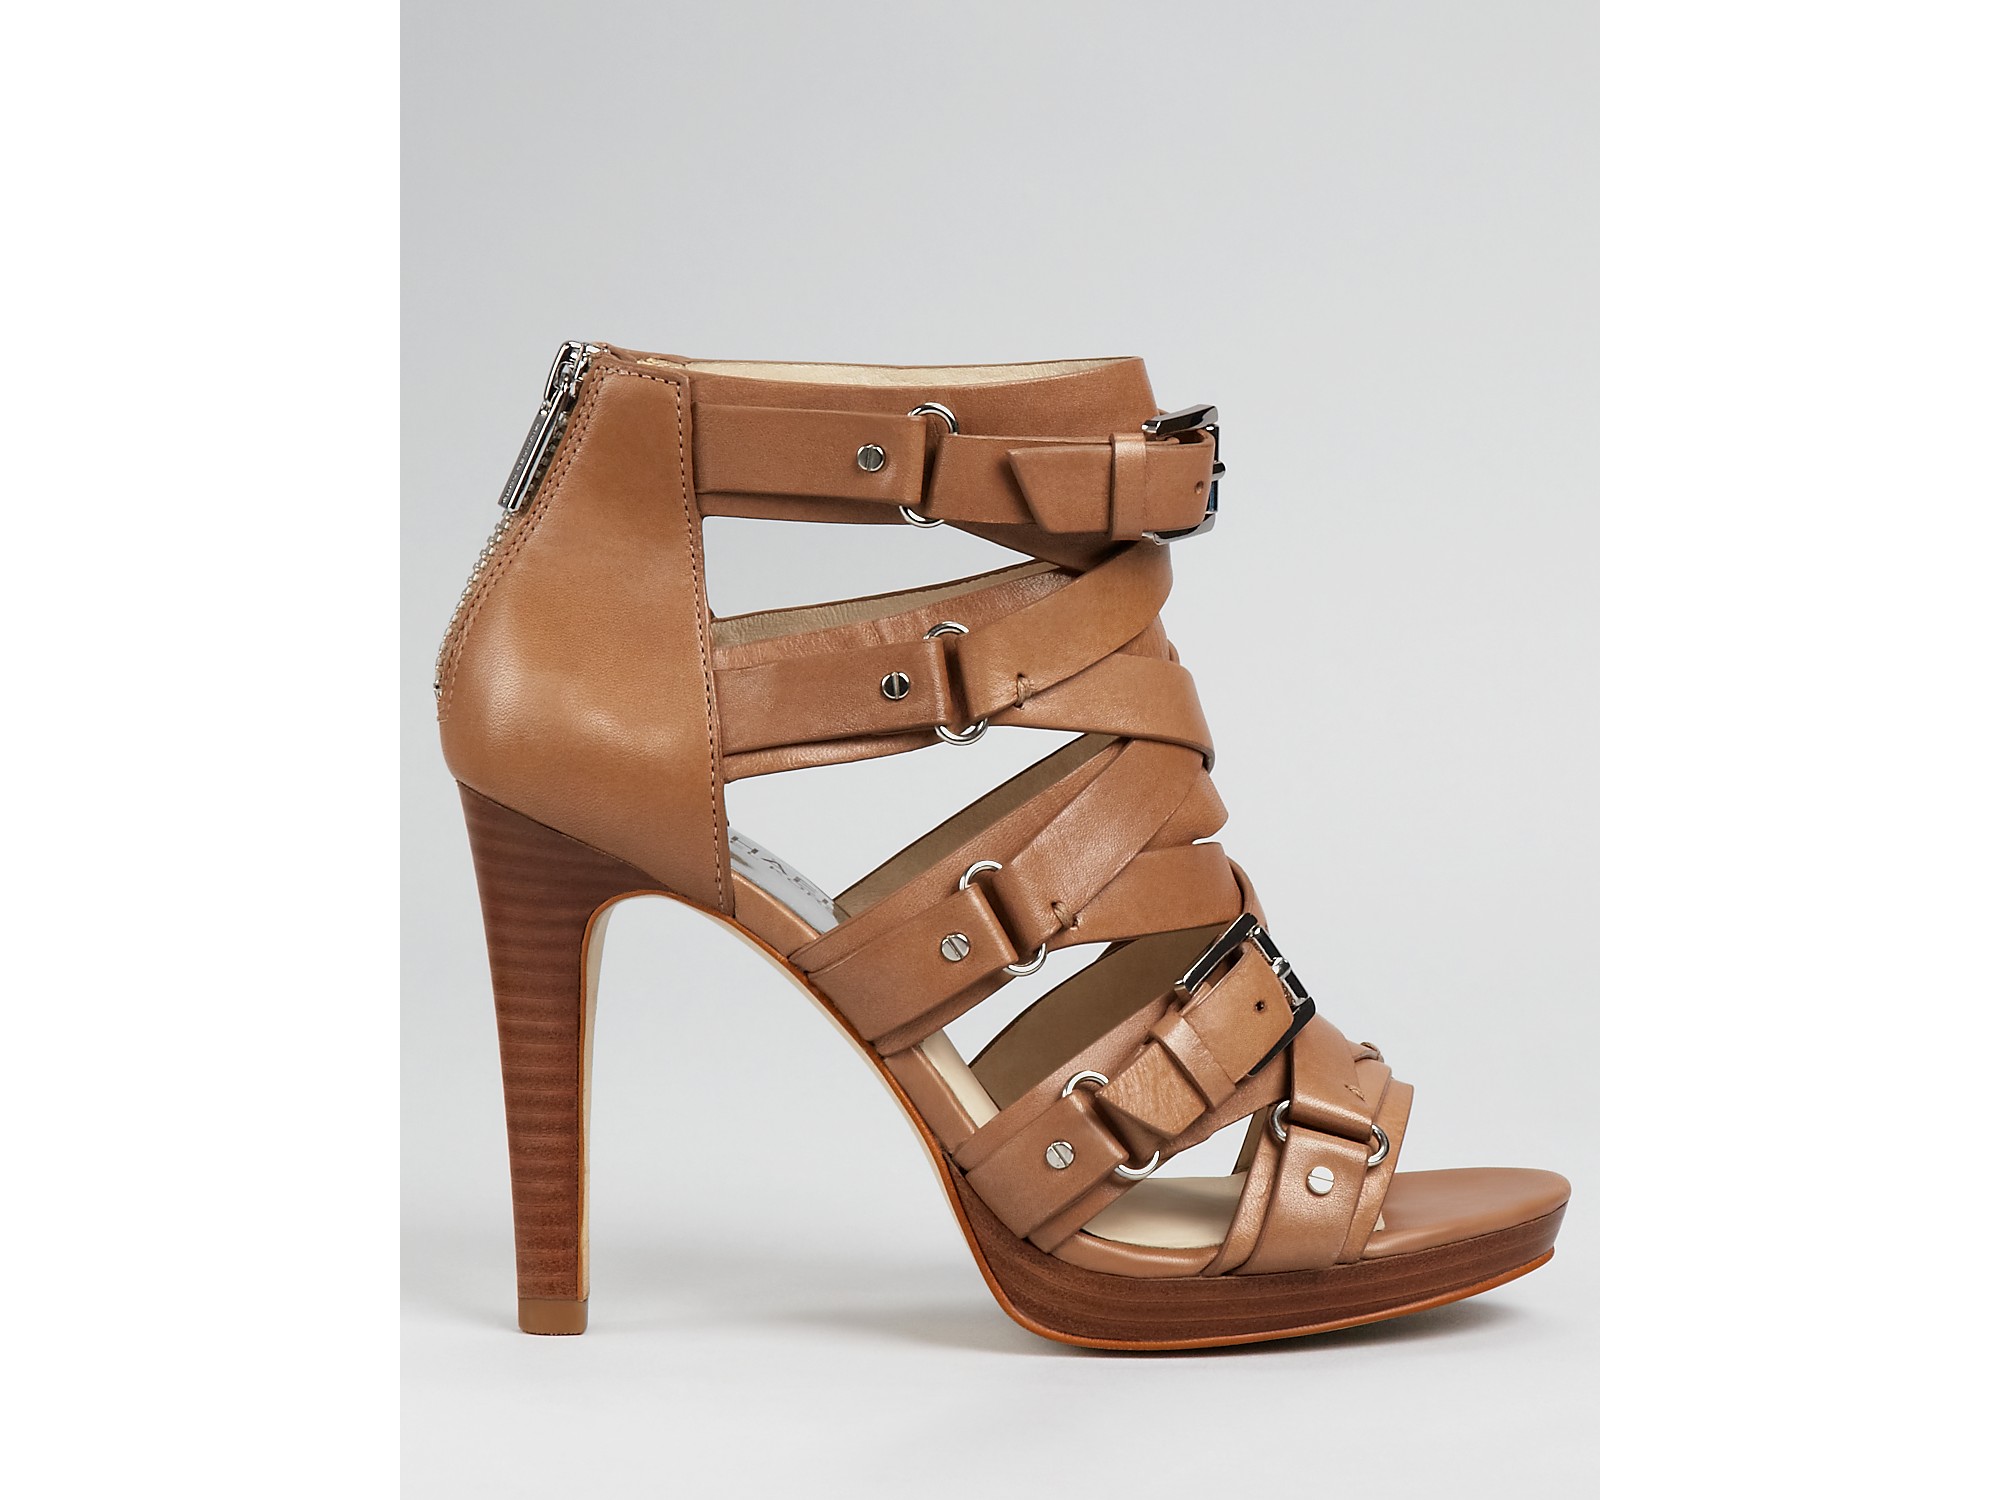 Lyst - Michael Kors Michael Sandals Leonia Strappy in Brown